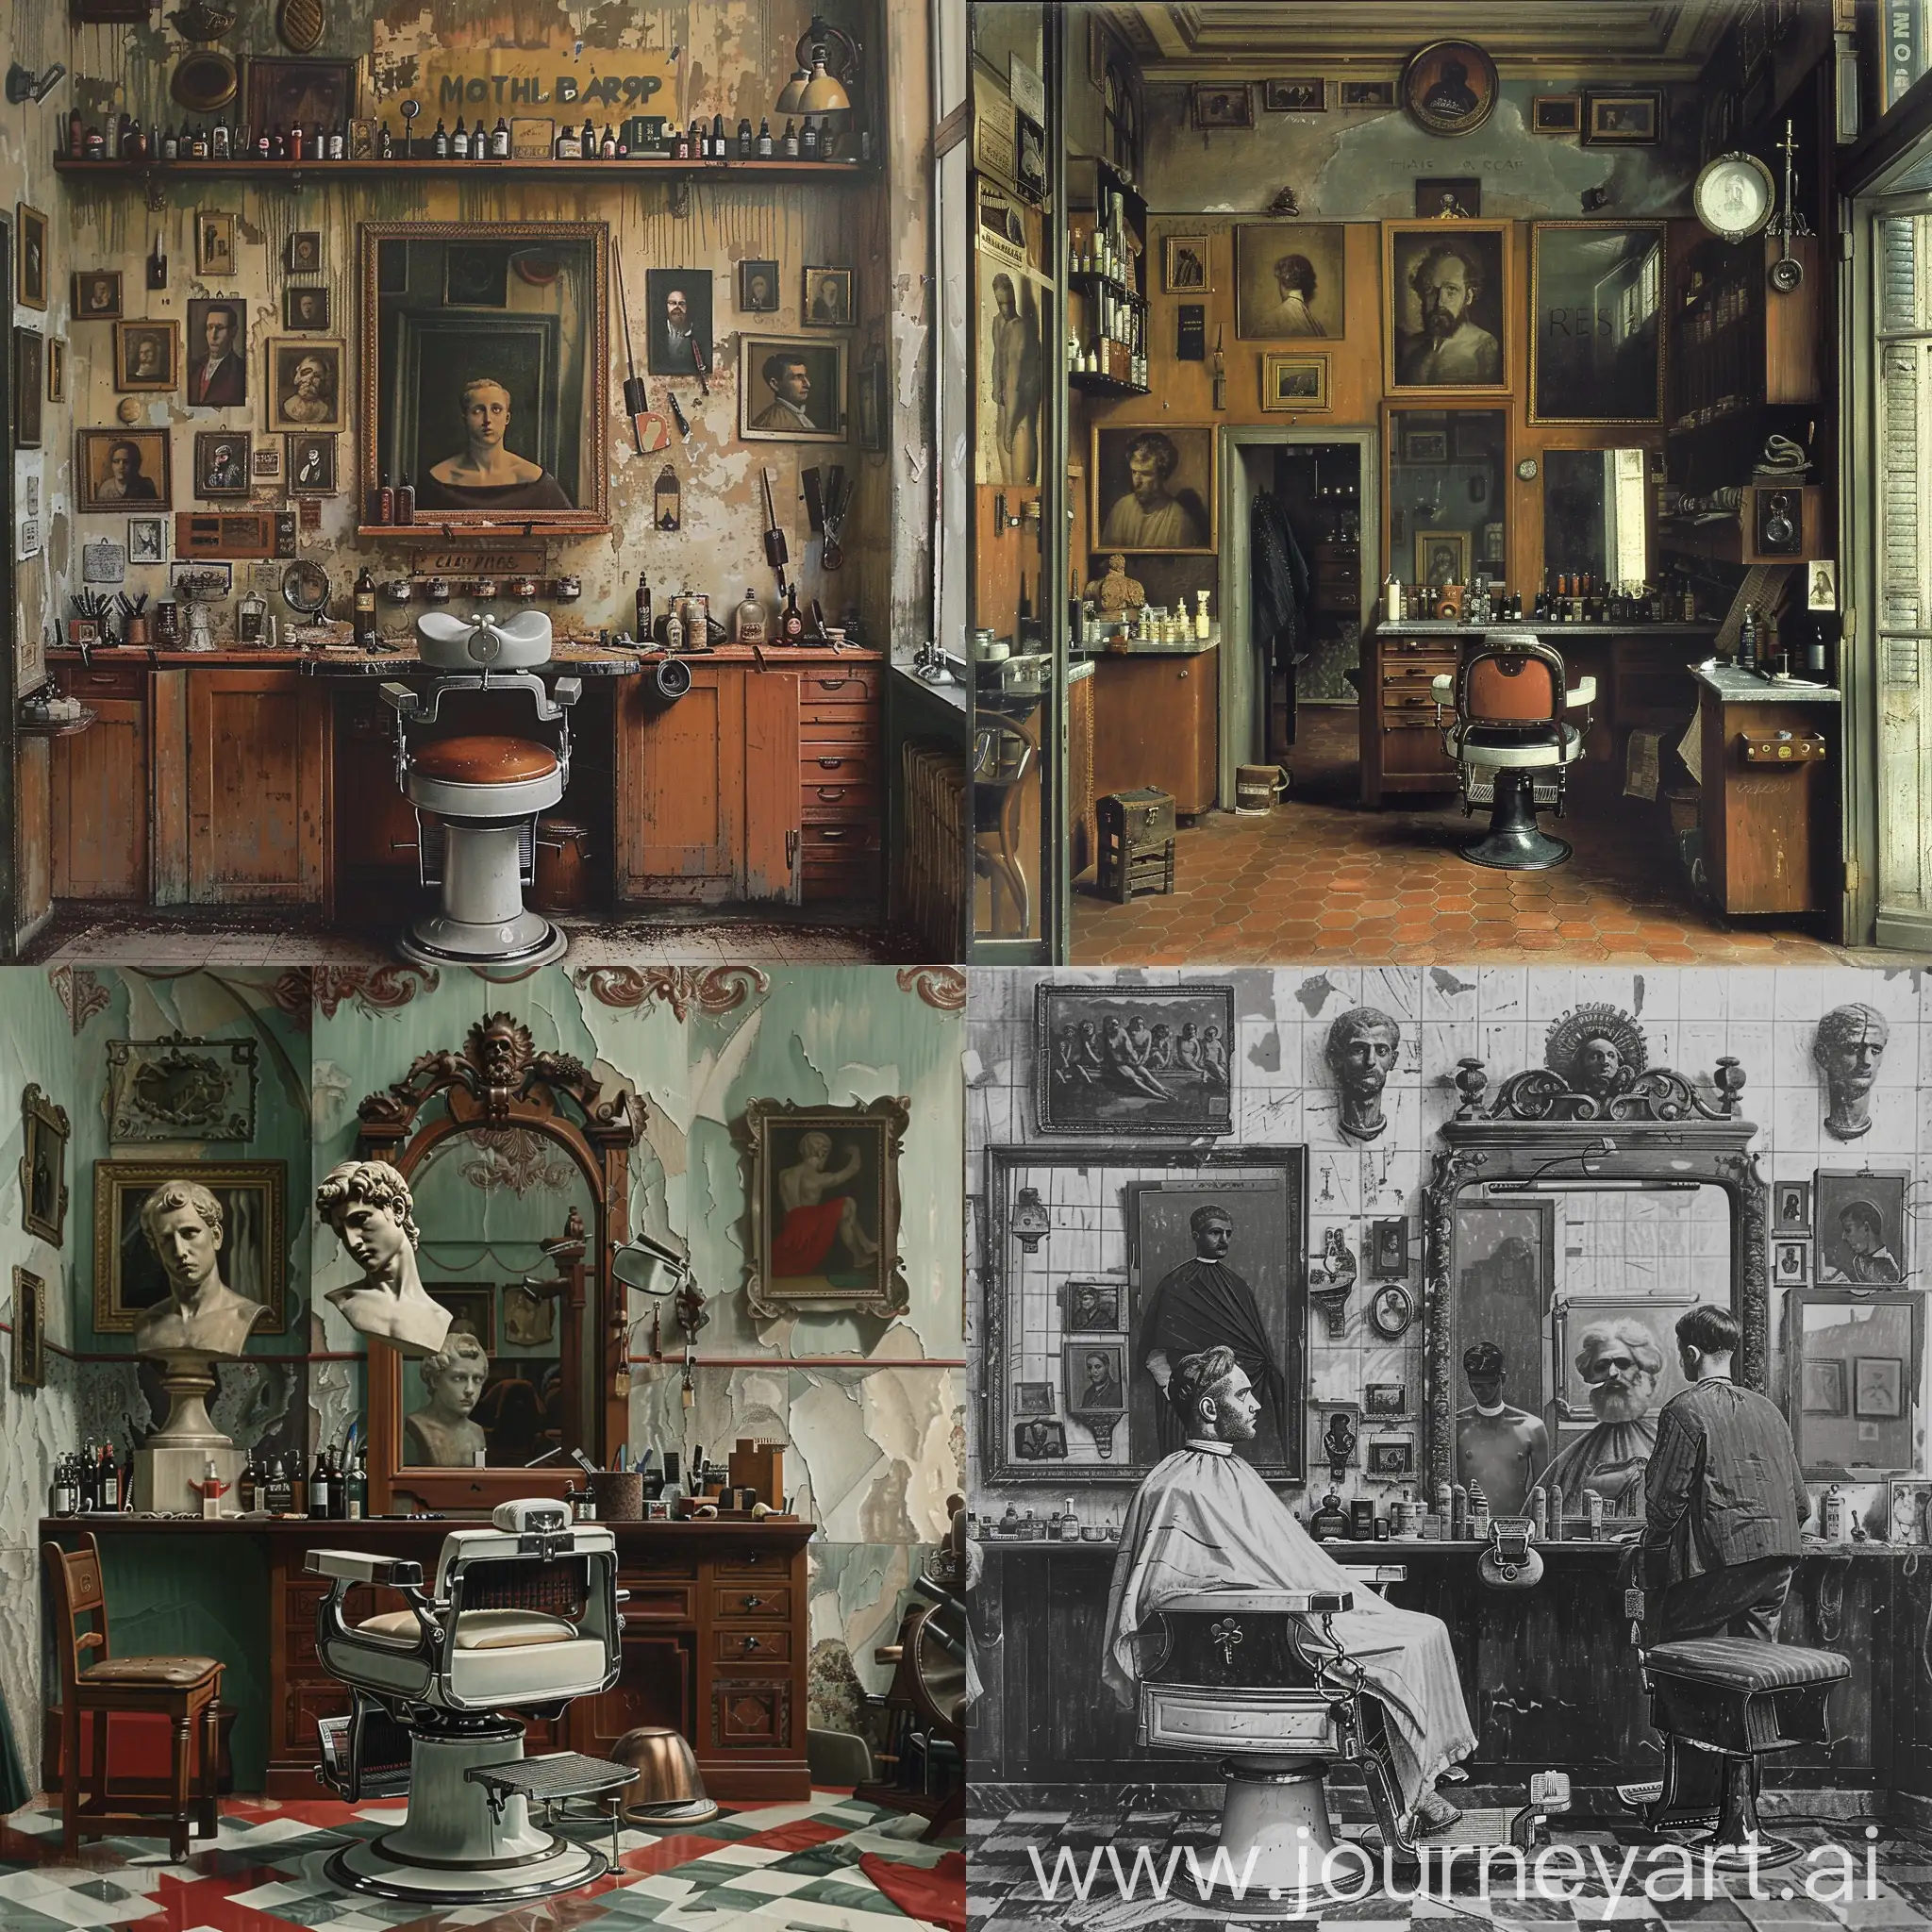 Michelangelo in the classic barber shop The barber shop should not be crowded and not have many accessories